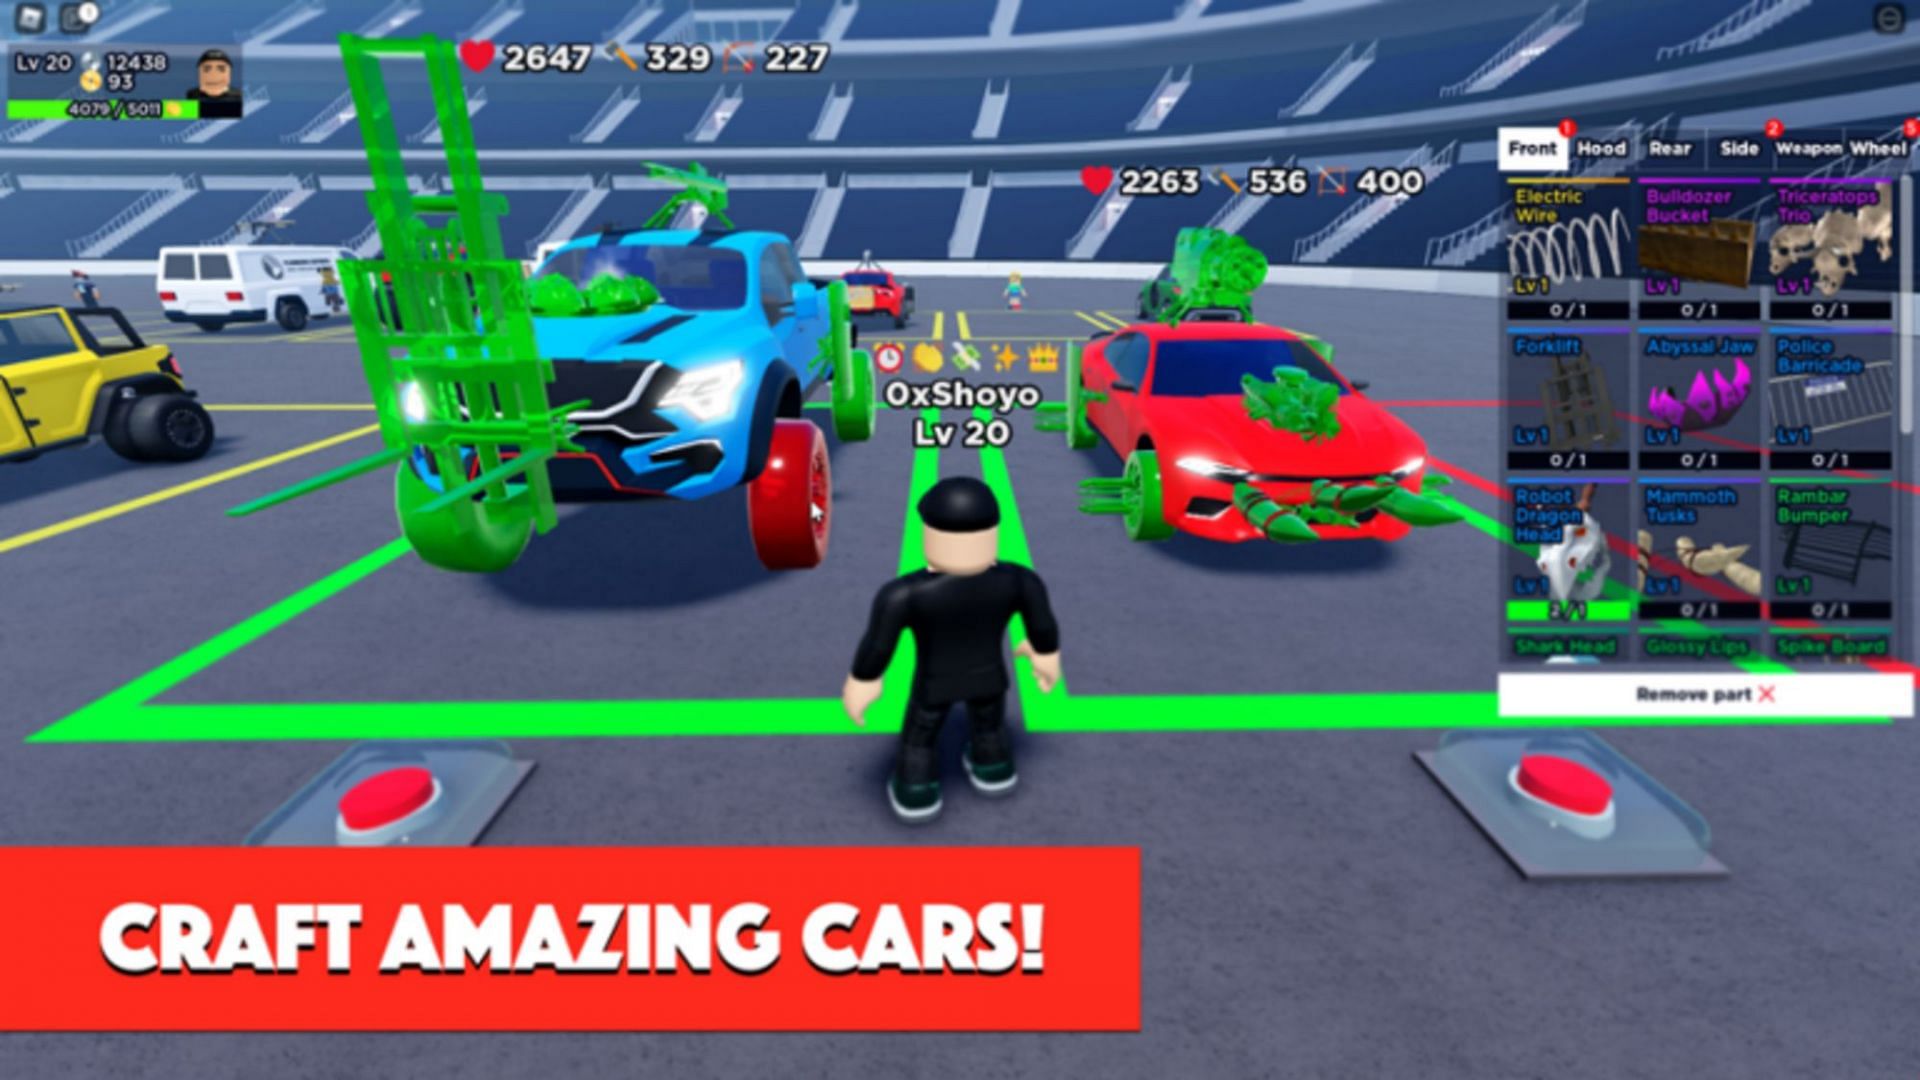 Roblox Carcraft codes: Loot boxes, gears, and other rewards (June 2022)